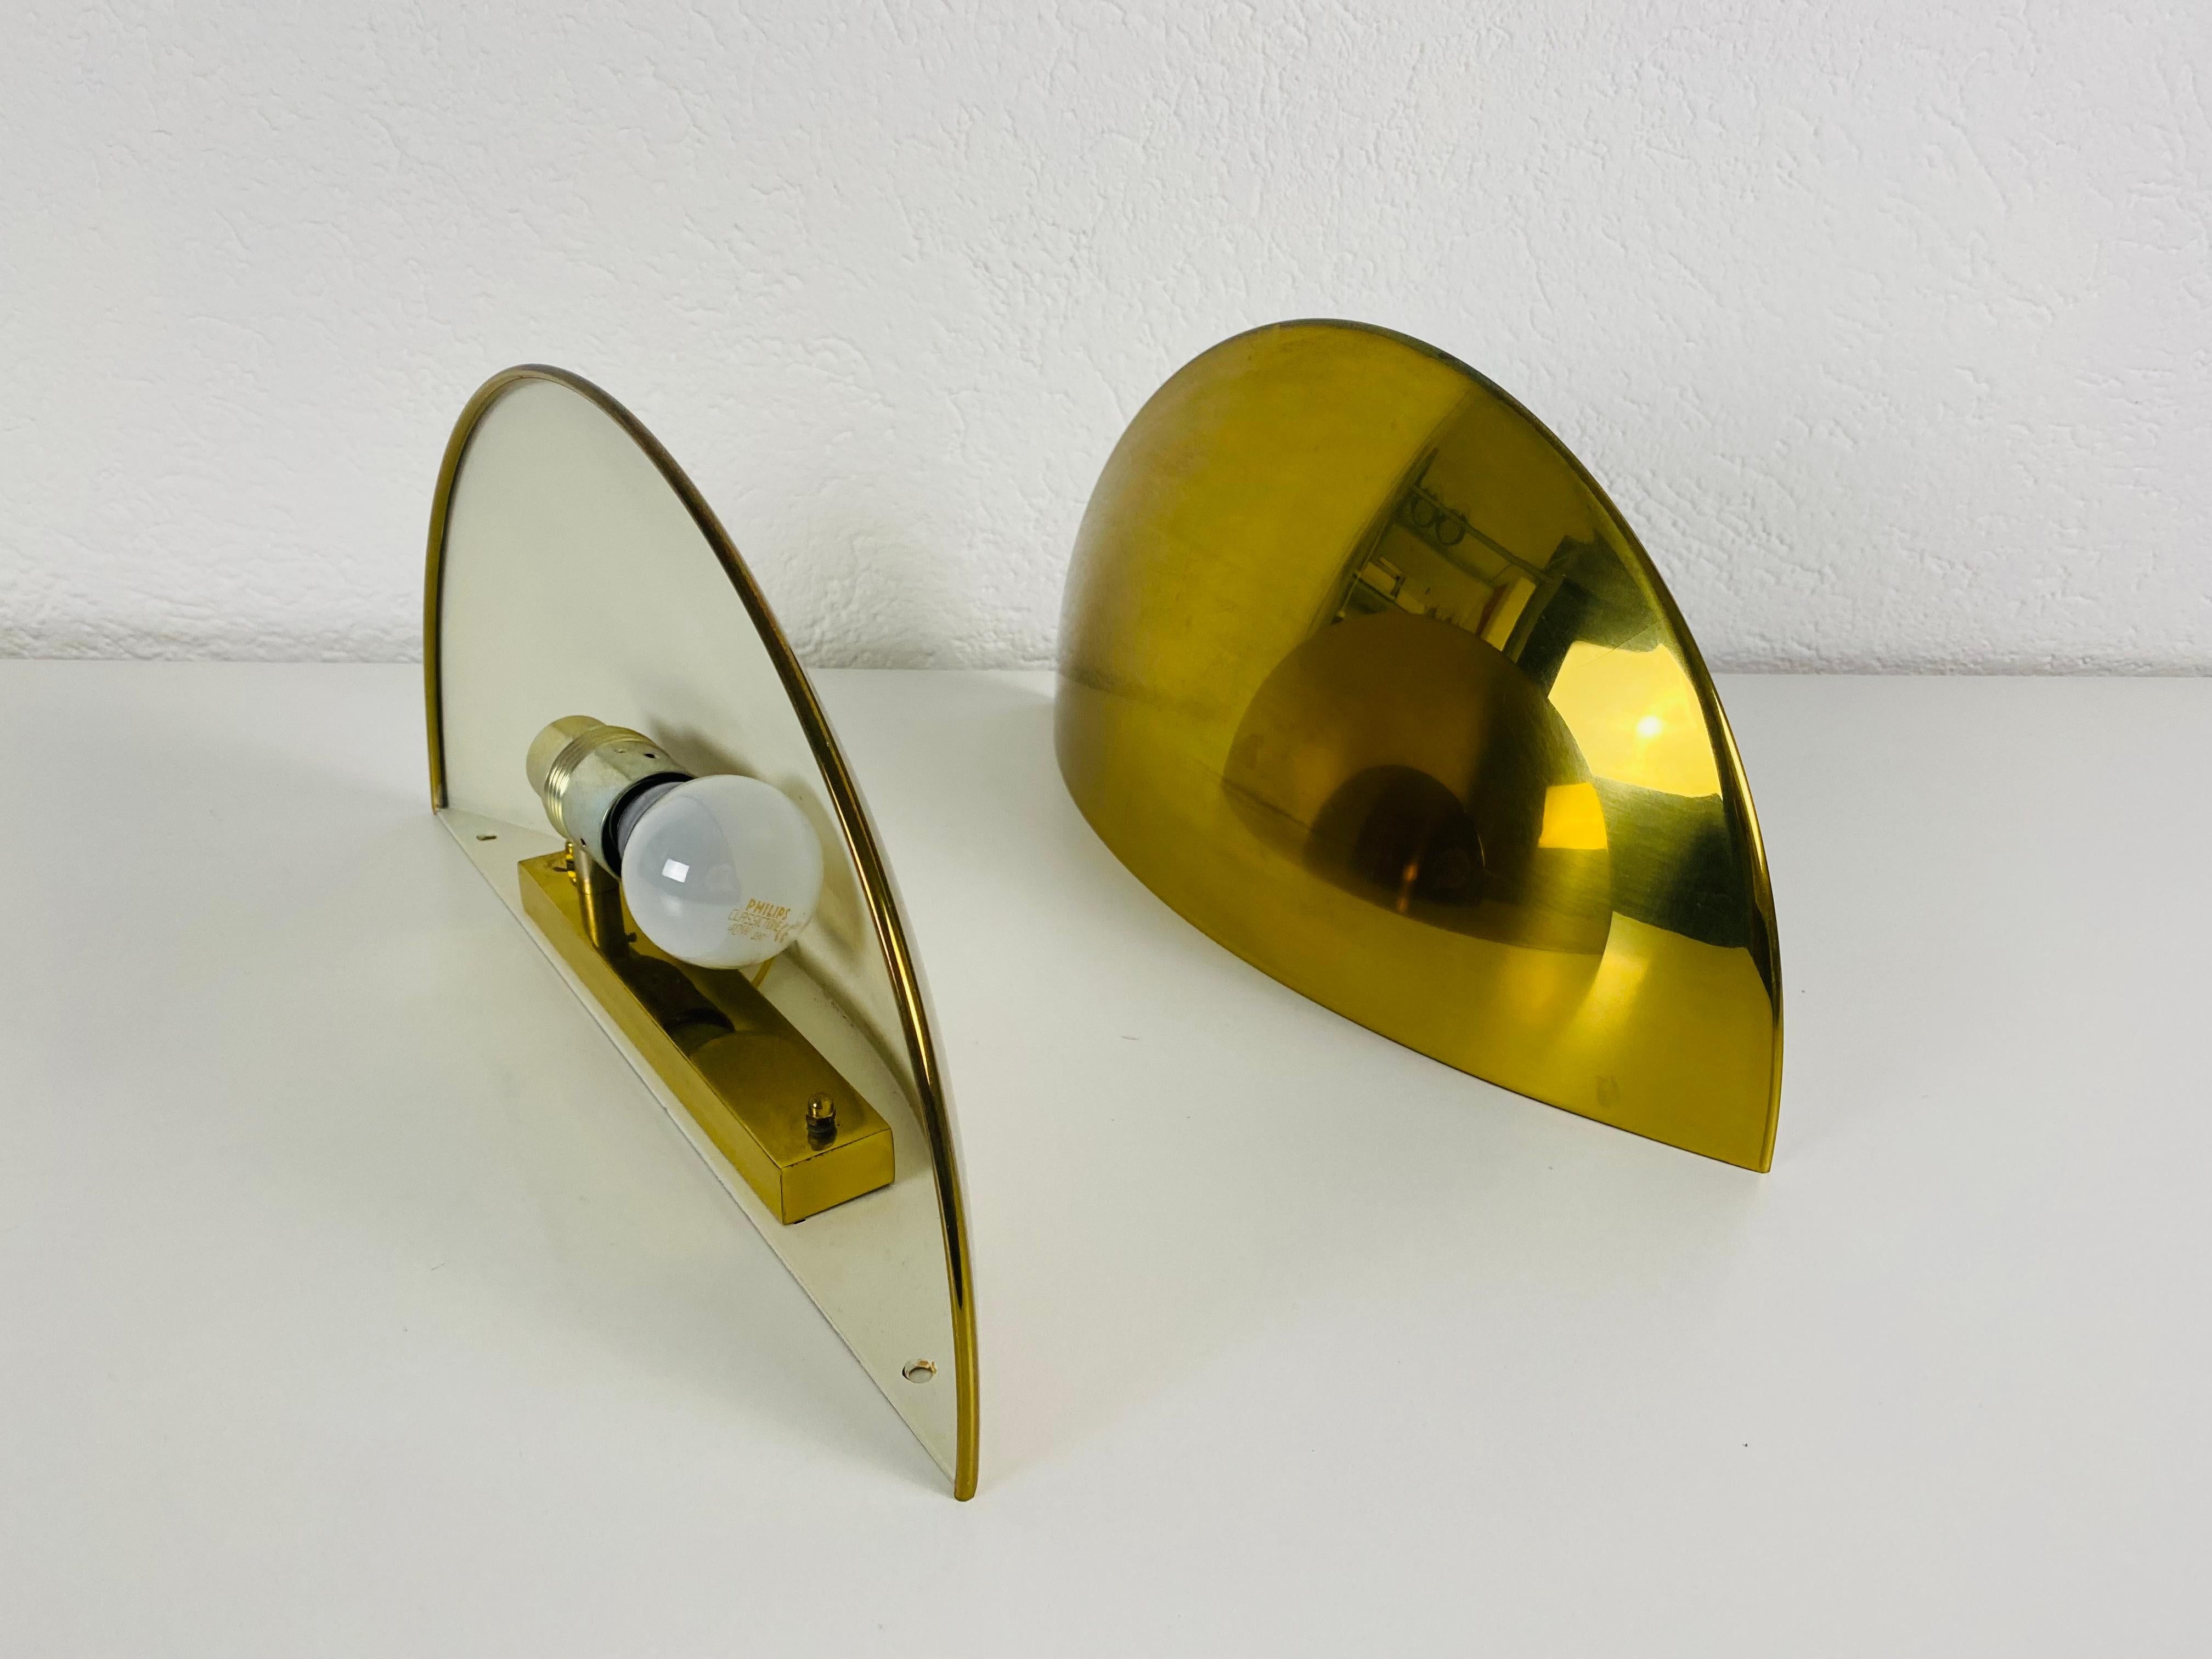 Pair of Florian Schulz Midcentury Brass Wall Lamps, 1960s For Sale 4